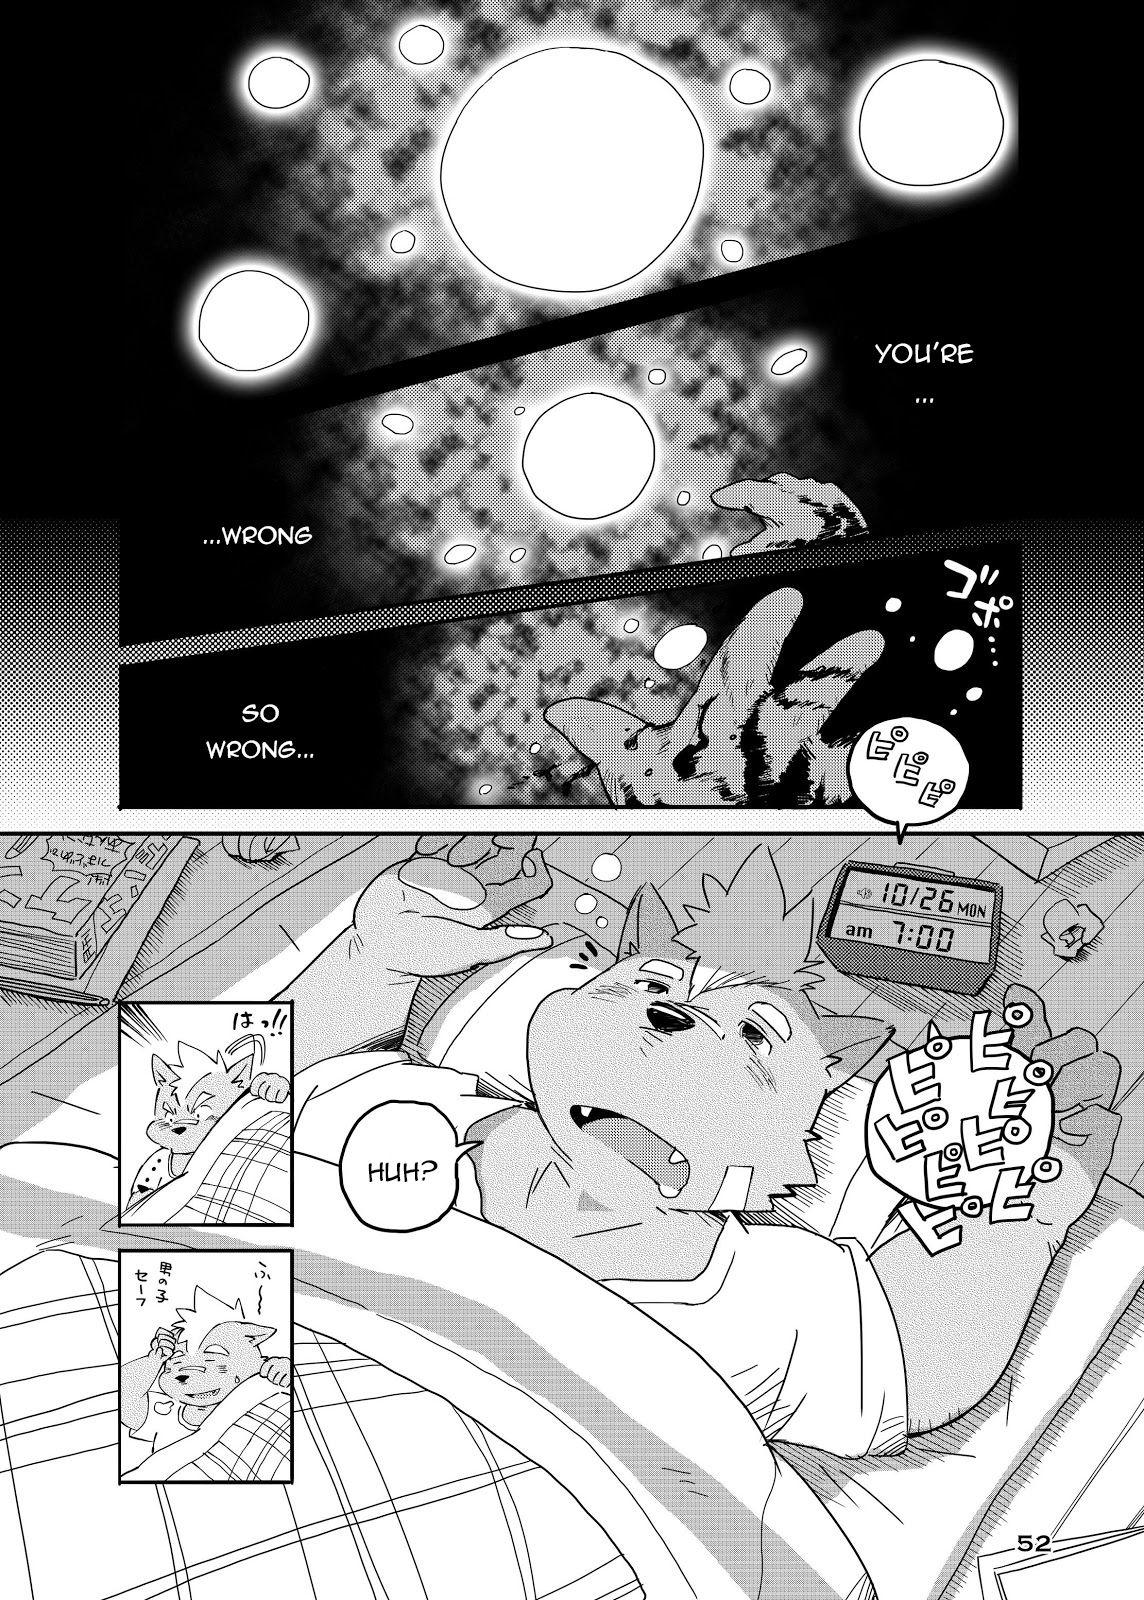 (Fur-st 3) [FCLG (Jiroh)] World Cell | World Cell - Day 1 (COWPER! vol.RED) [English] [N] (ふぁーすと3) [フクラグ (次郎)] WORLD CELL (カウパー! vol.RED) [英訳]